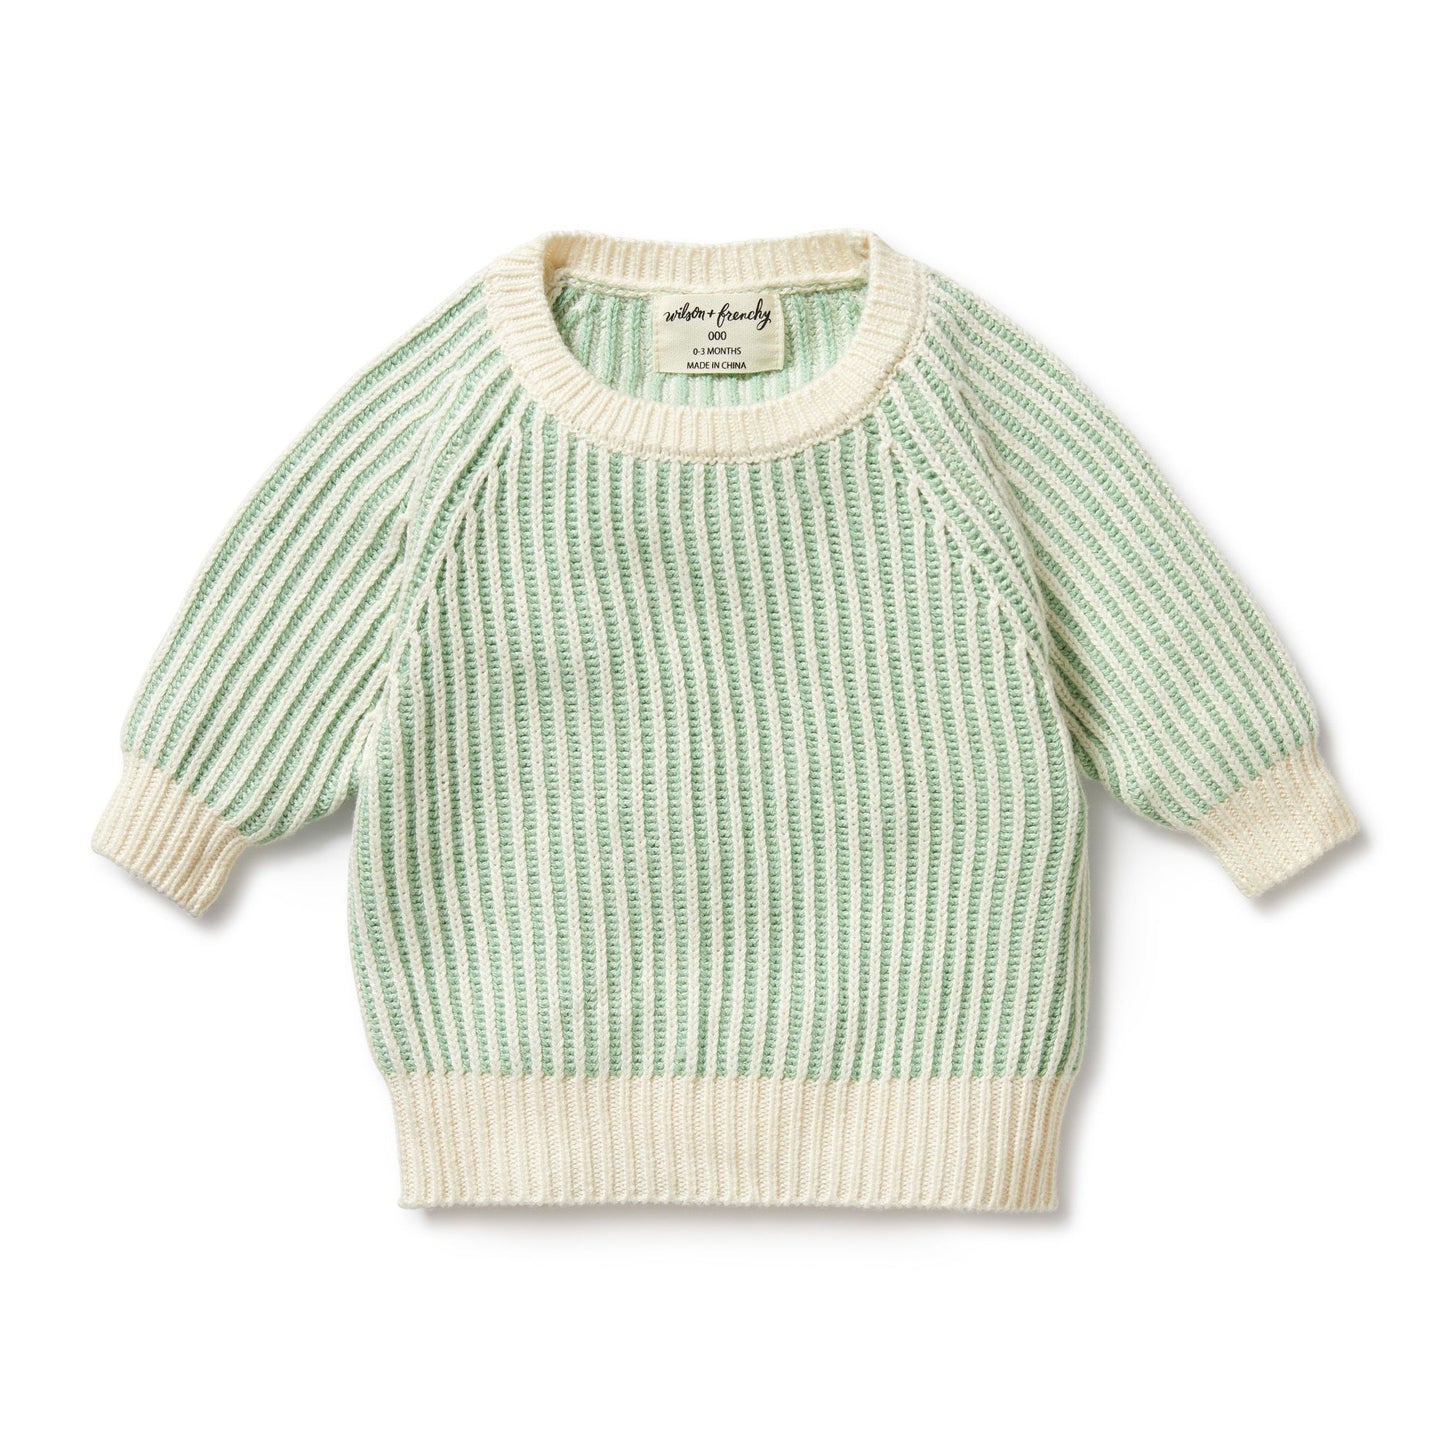 "Wilson & Frenchy" - Knitted Ribbed Jumper - Mint Green